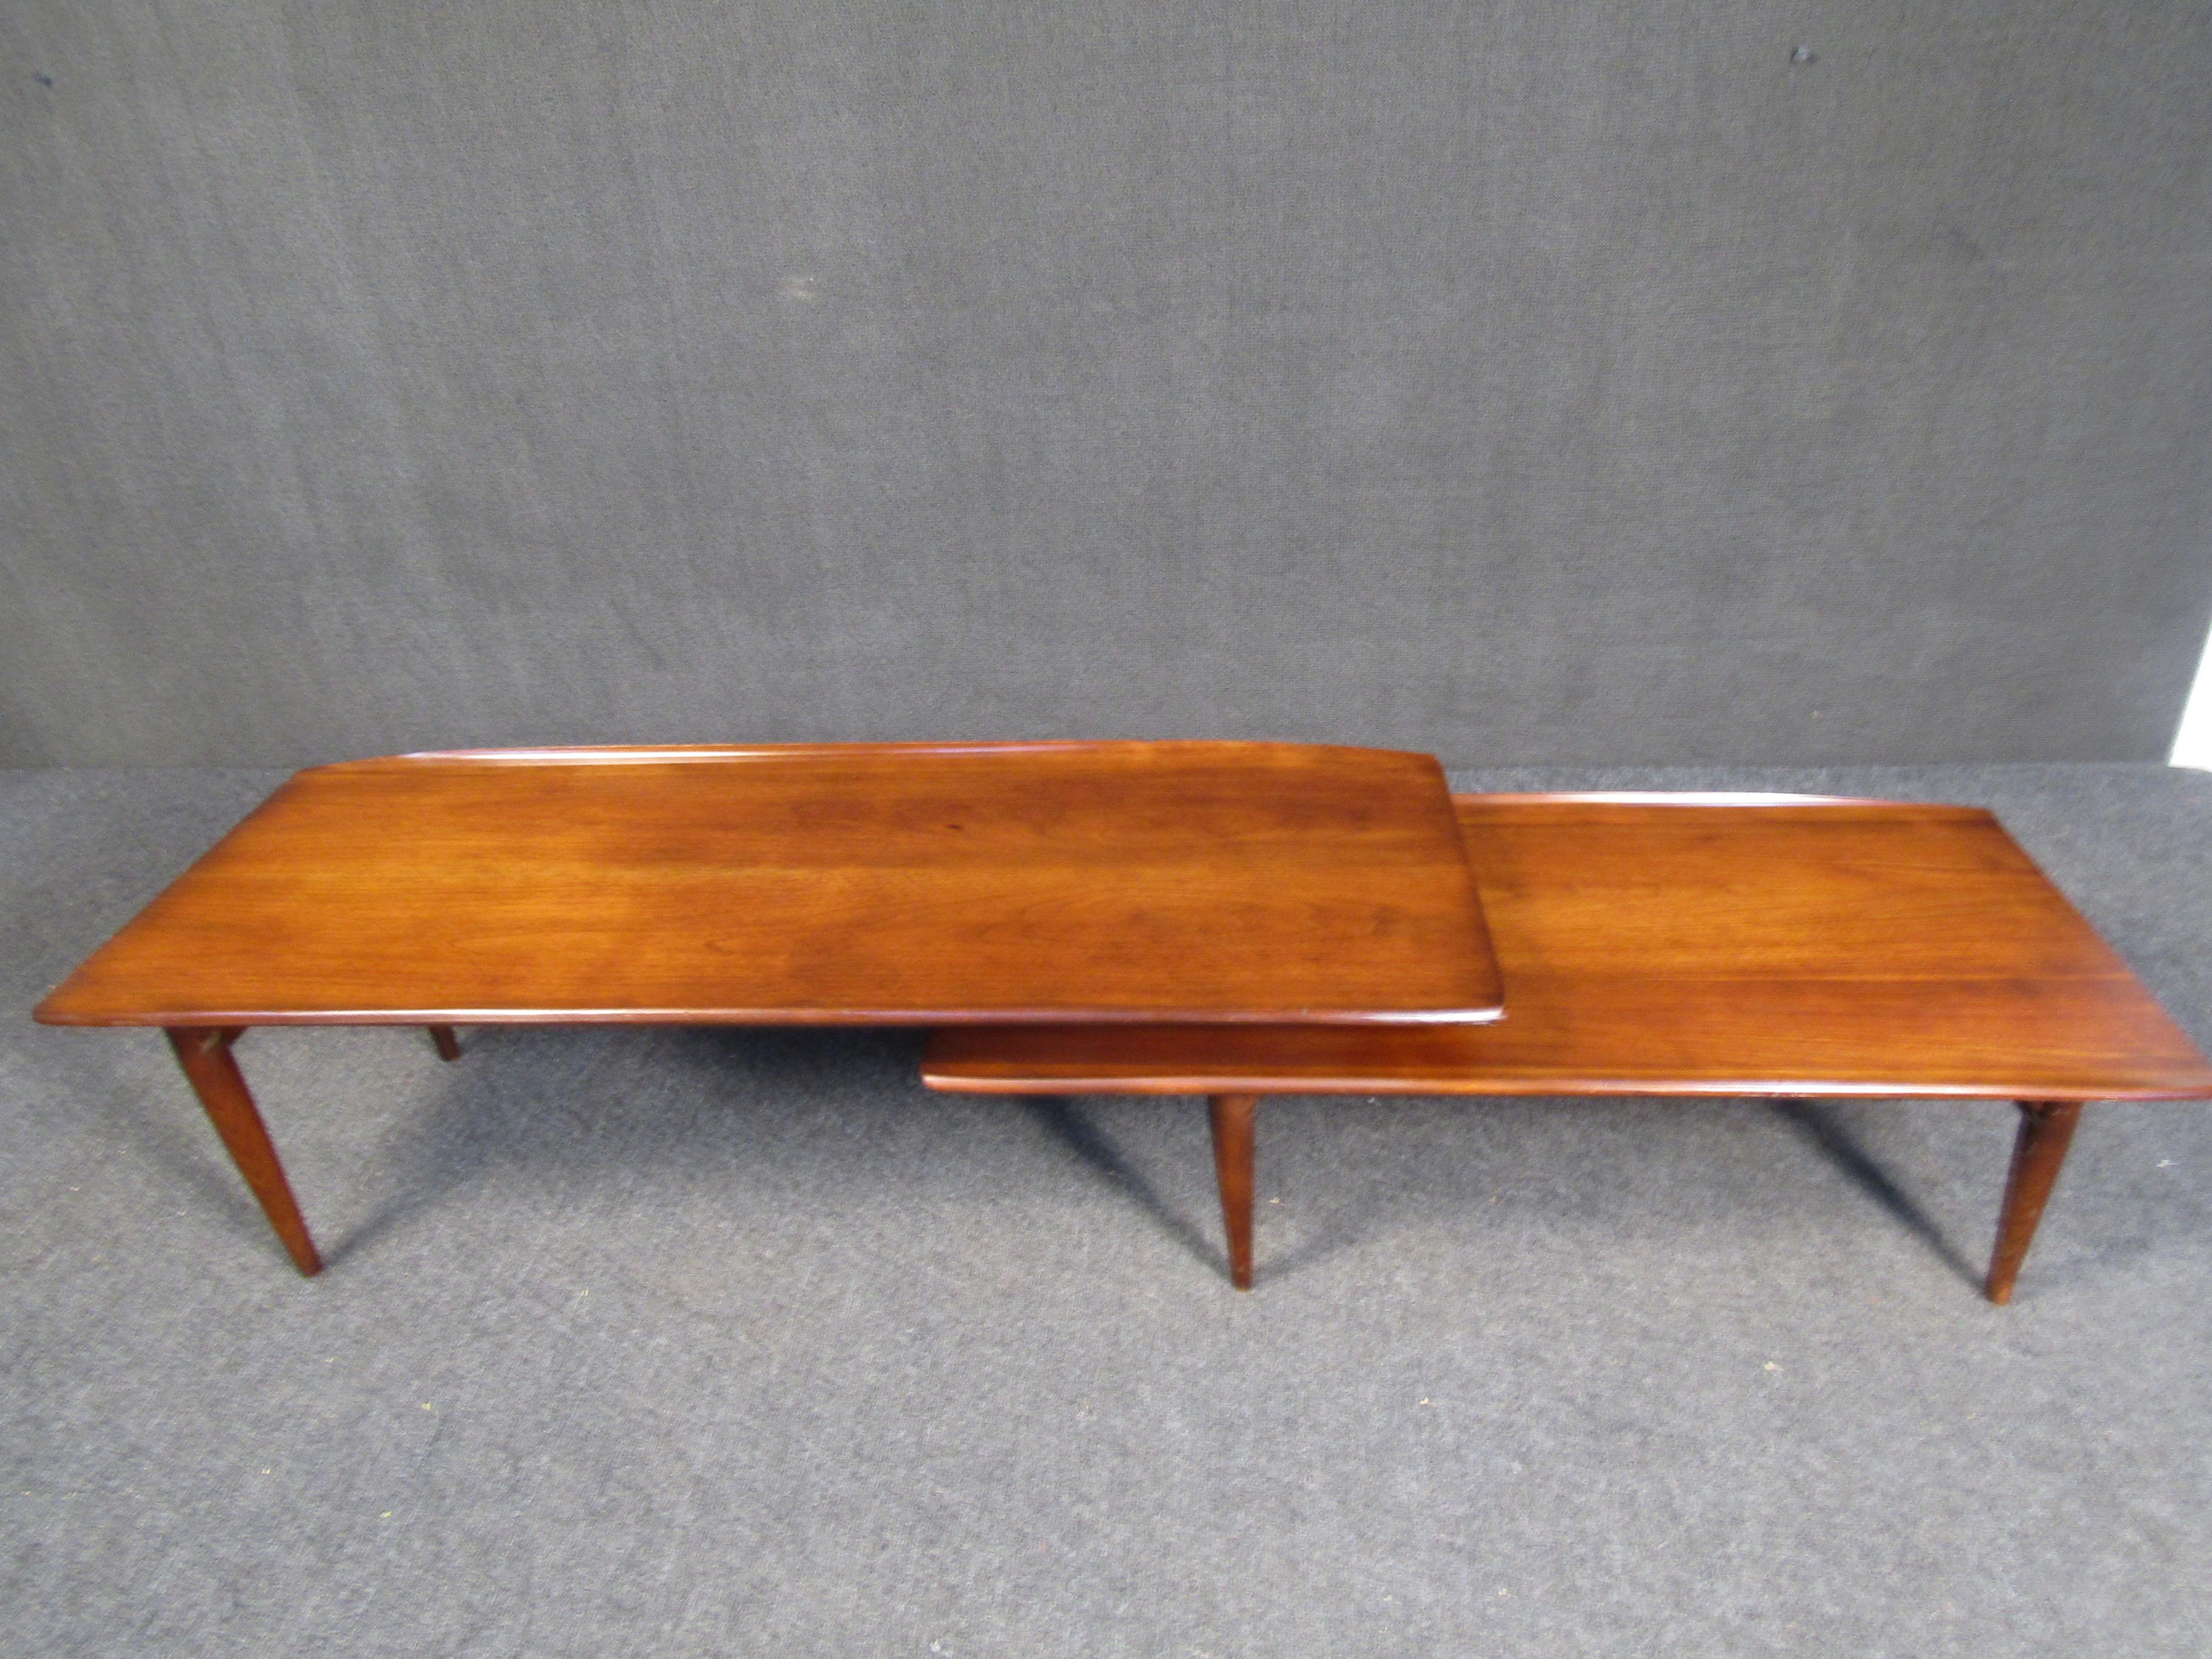 With a unique adjustable design, this two-tiered coffee table can be rearranged to work in different settings. Handsome teak woodgrain makes this piece perfect for adding Mid-Century style to any interior. Please confirm item location with seller